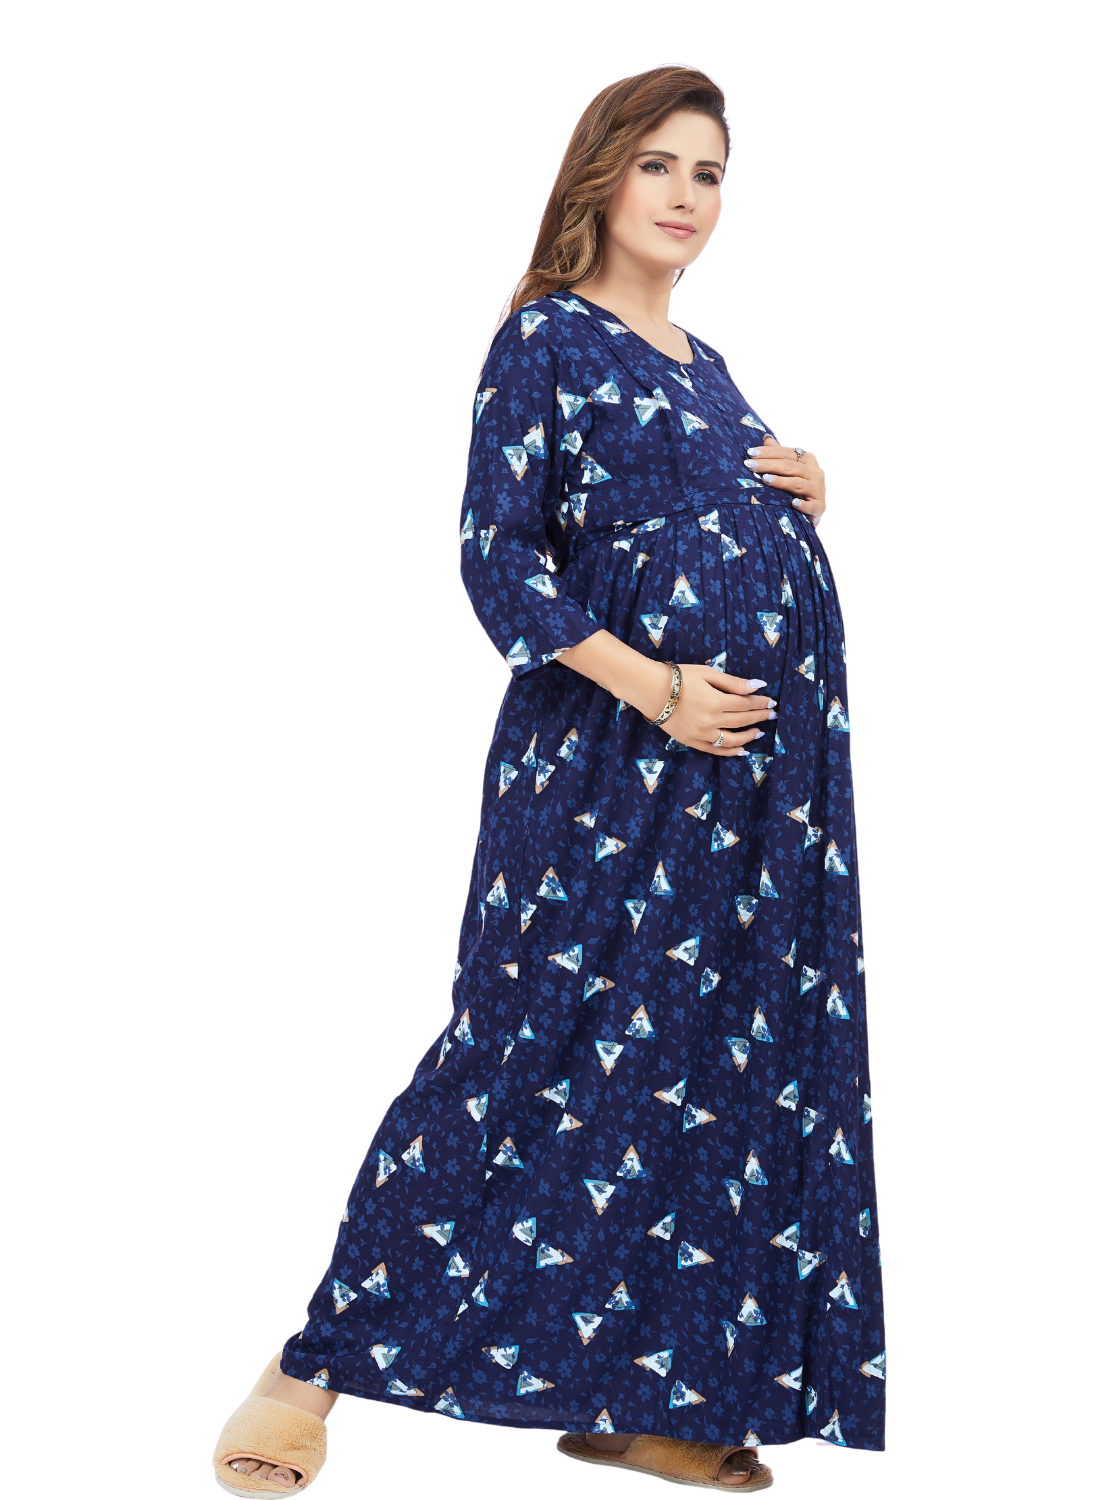 New Arrivals ONLY MINE 4-IN-ONE Mom's Wear - Soft & Smooth Rayon | Maternity | Feeding | Maxi | Long Frock | Casual Wear